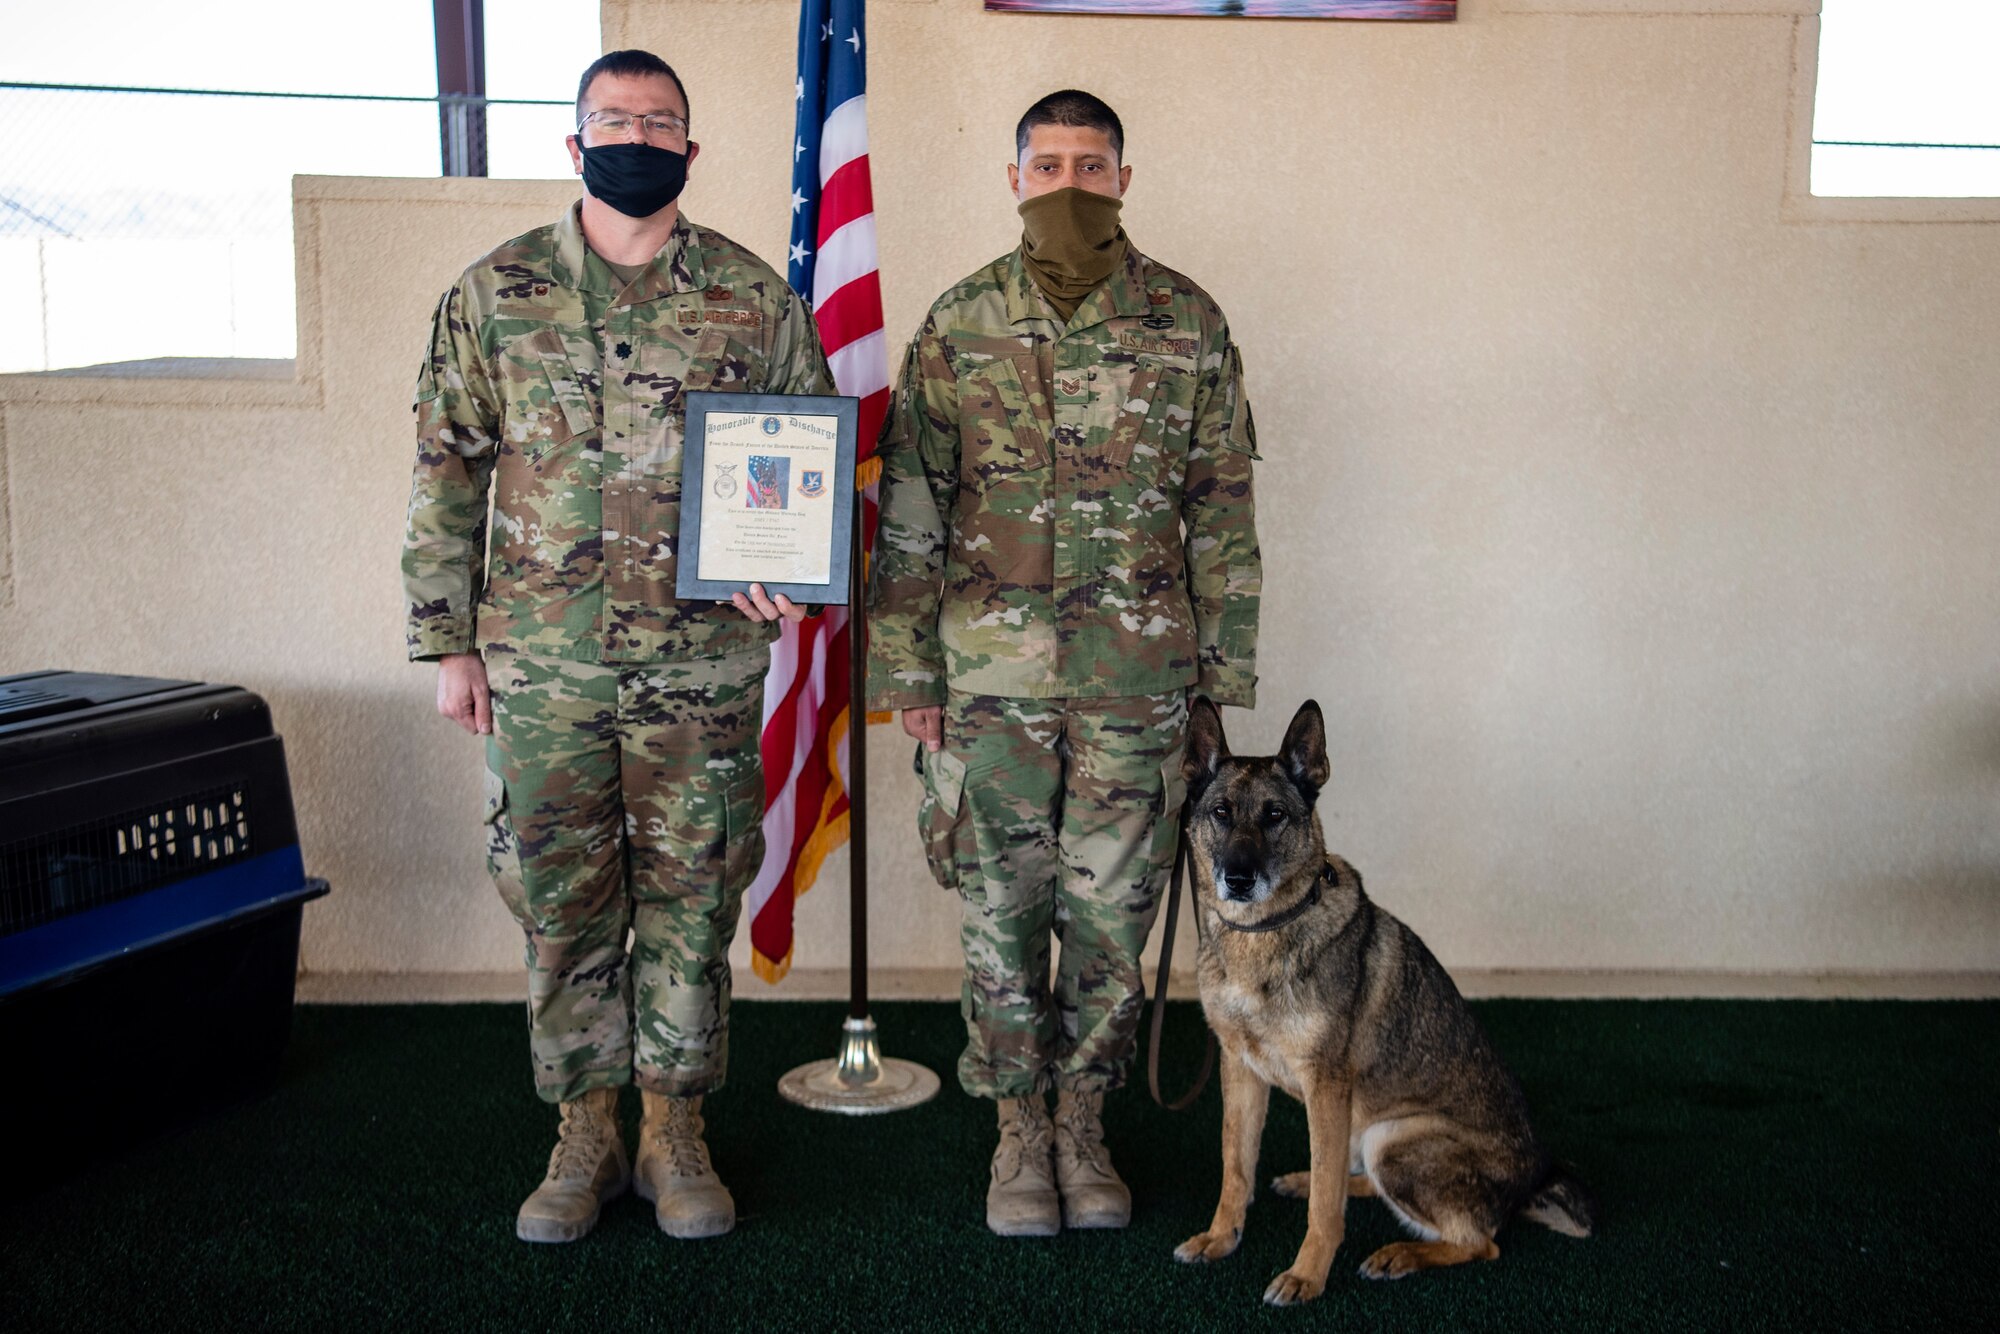 Two security forces members hold a certificate while the military working dog sits by their side.